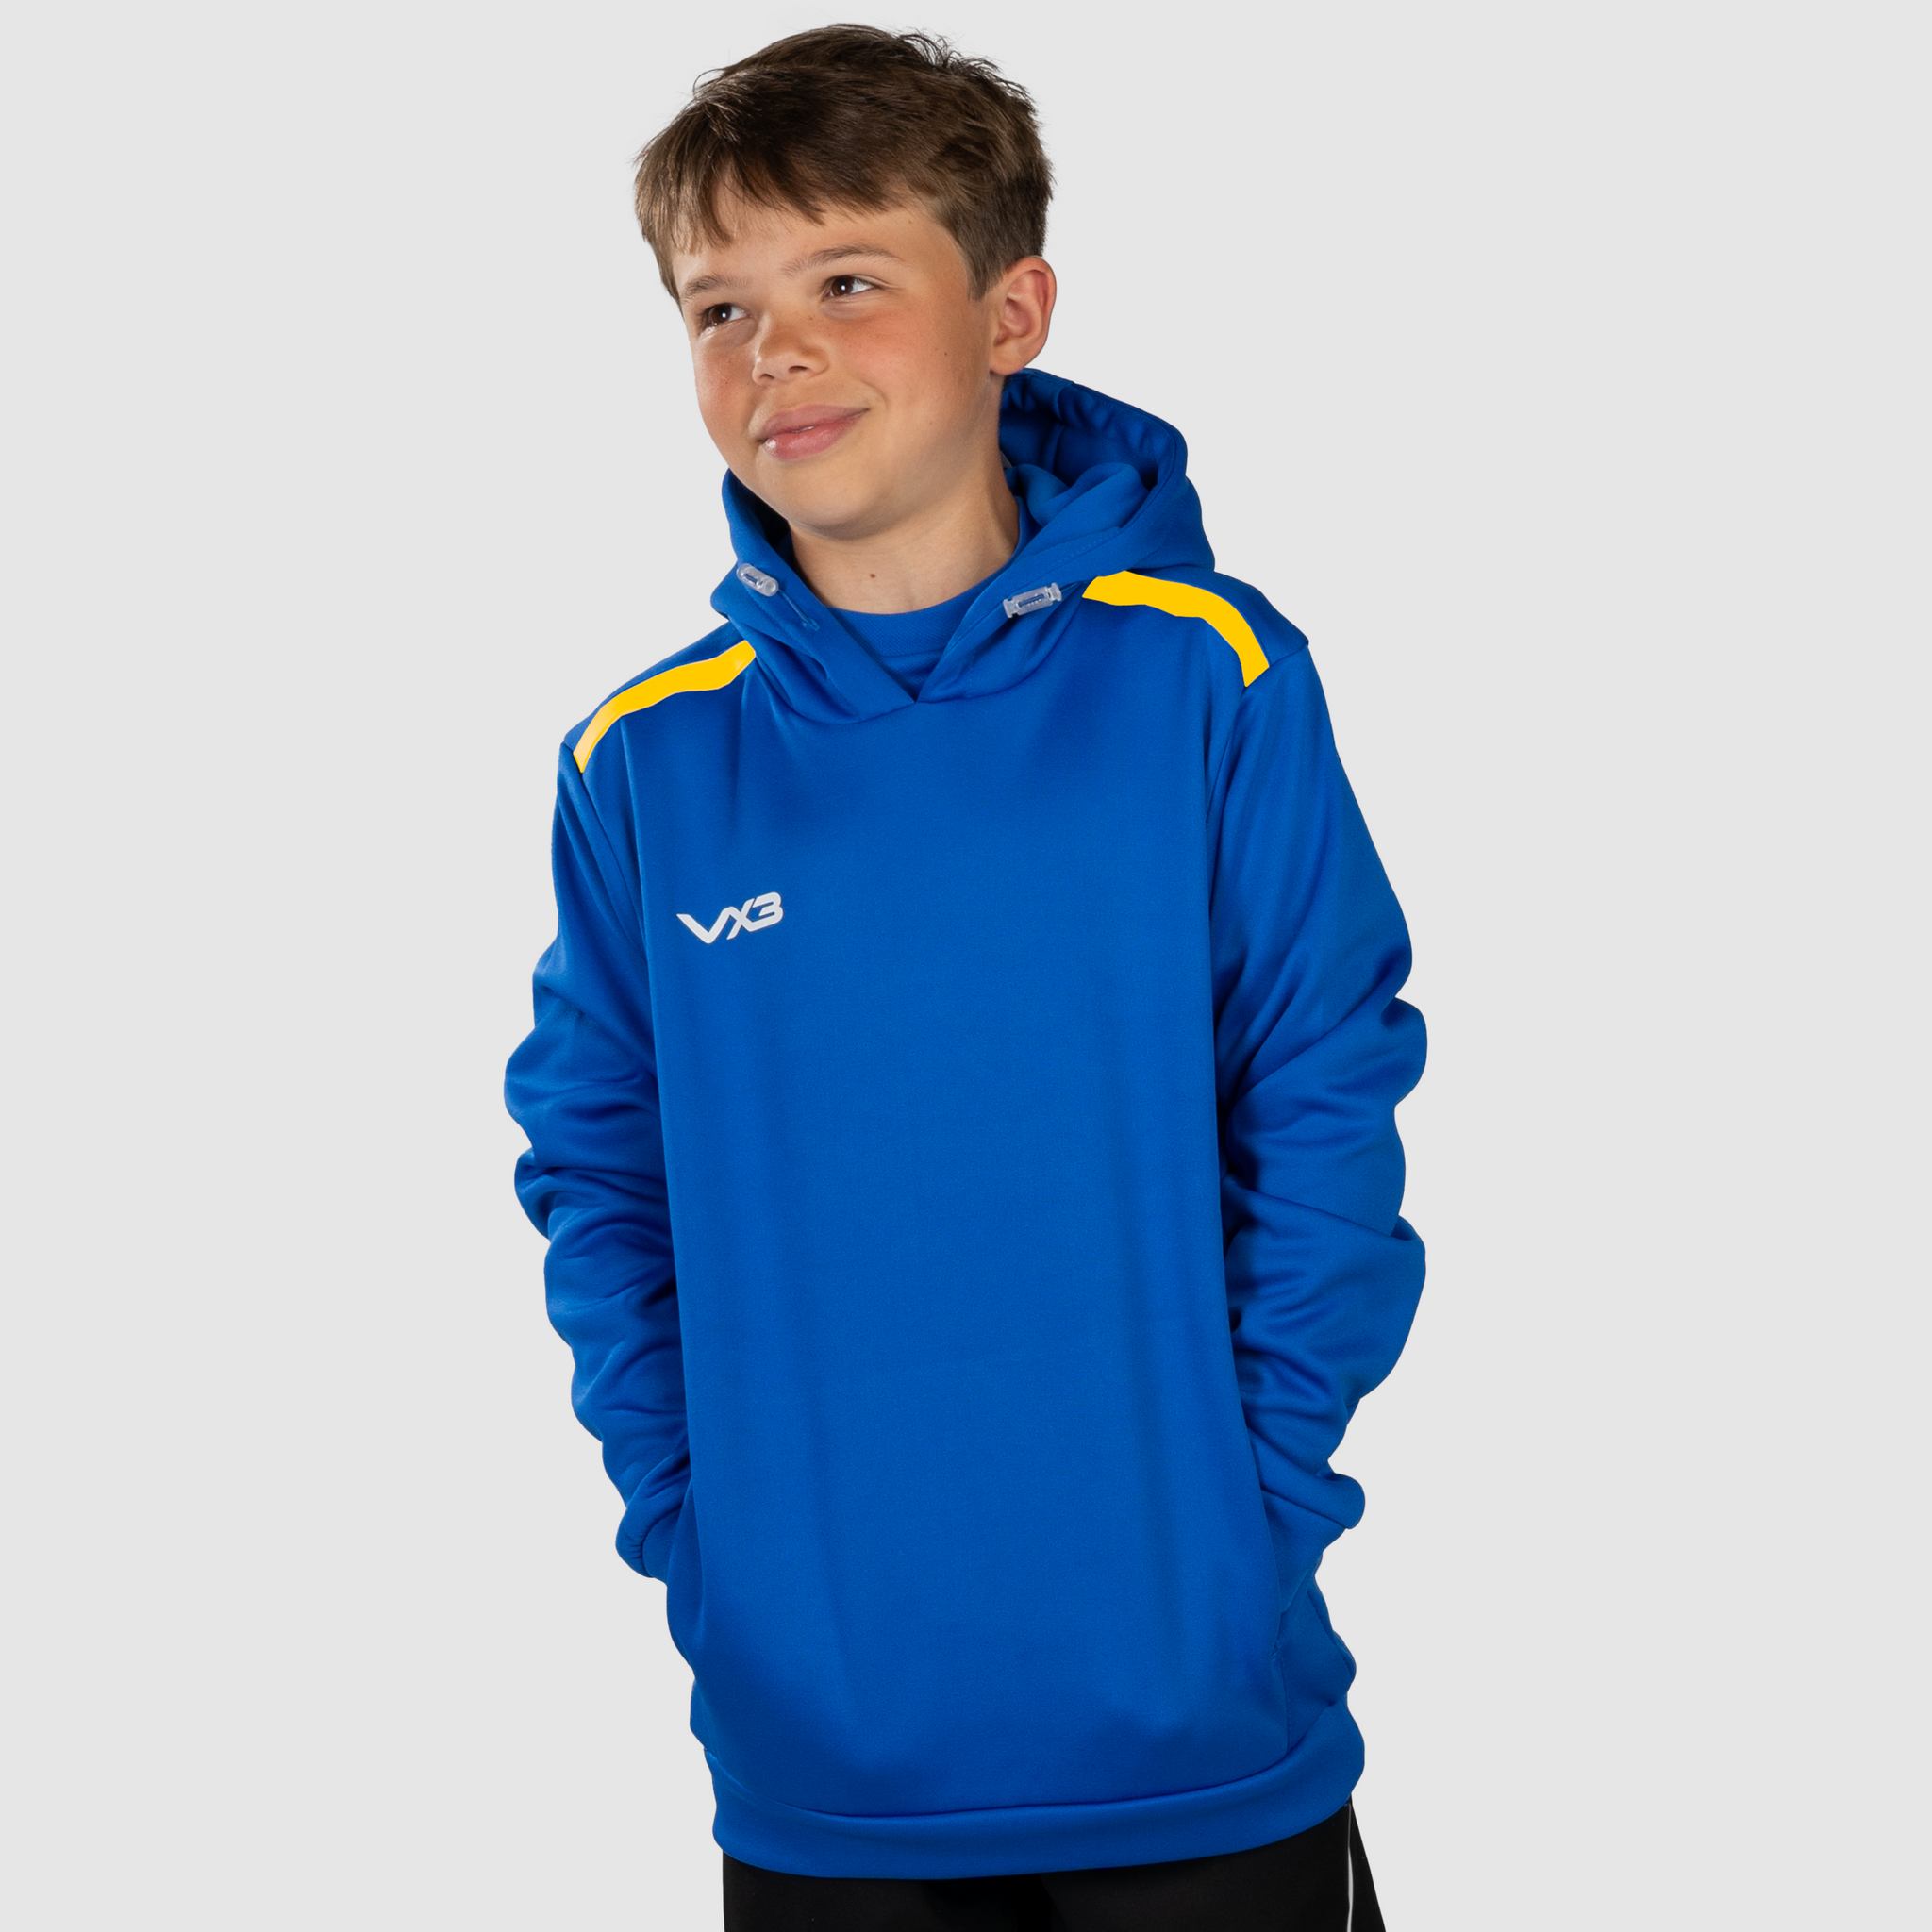 Fortis Youth Hoodie Royal/Yellow